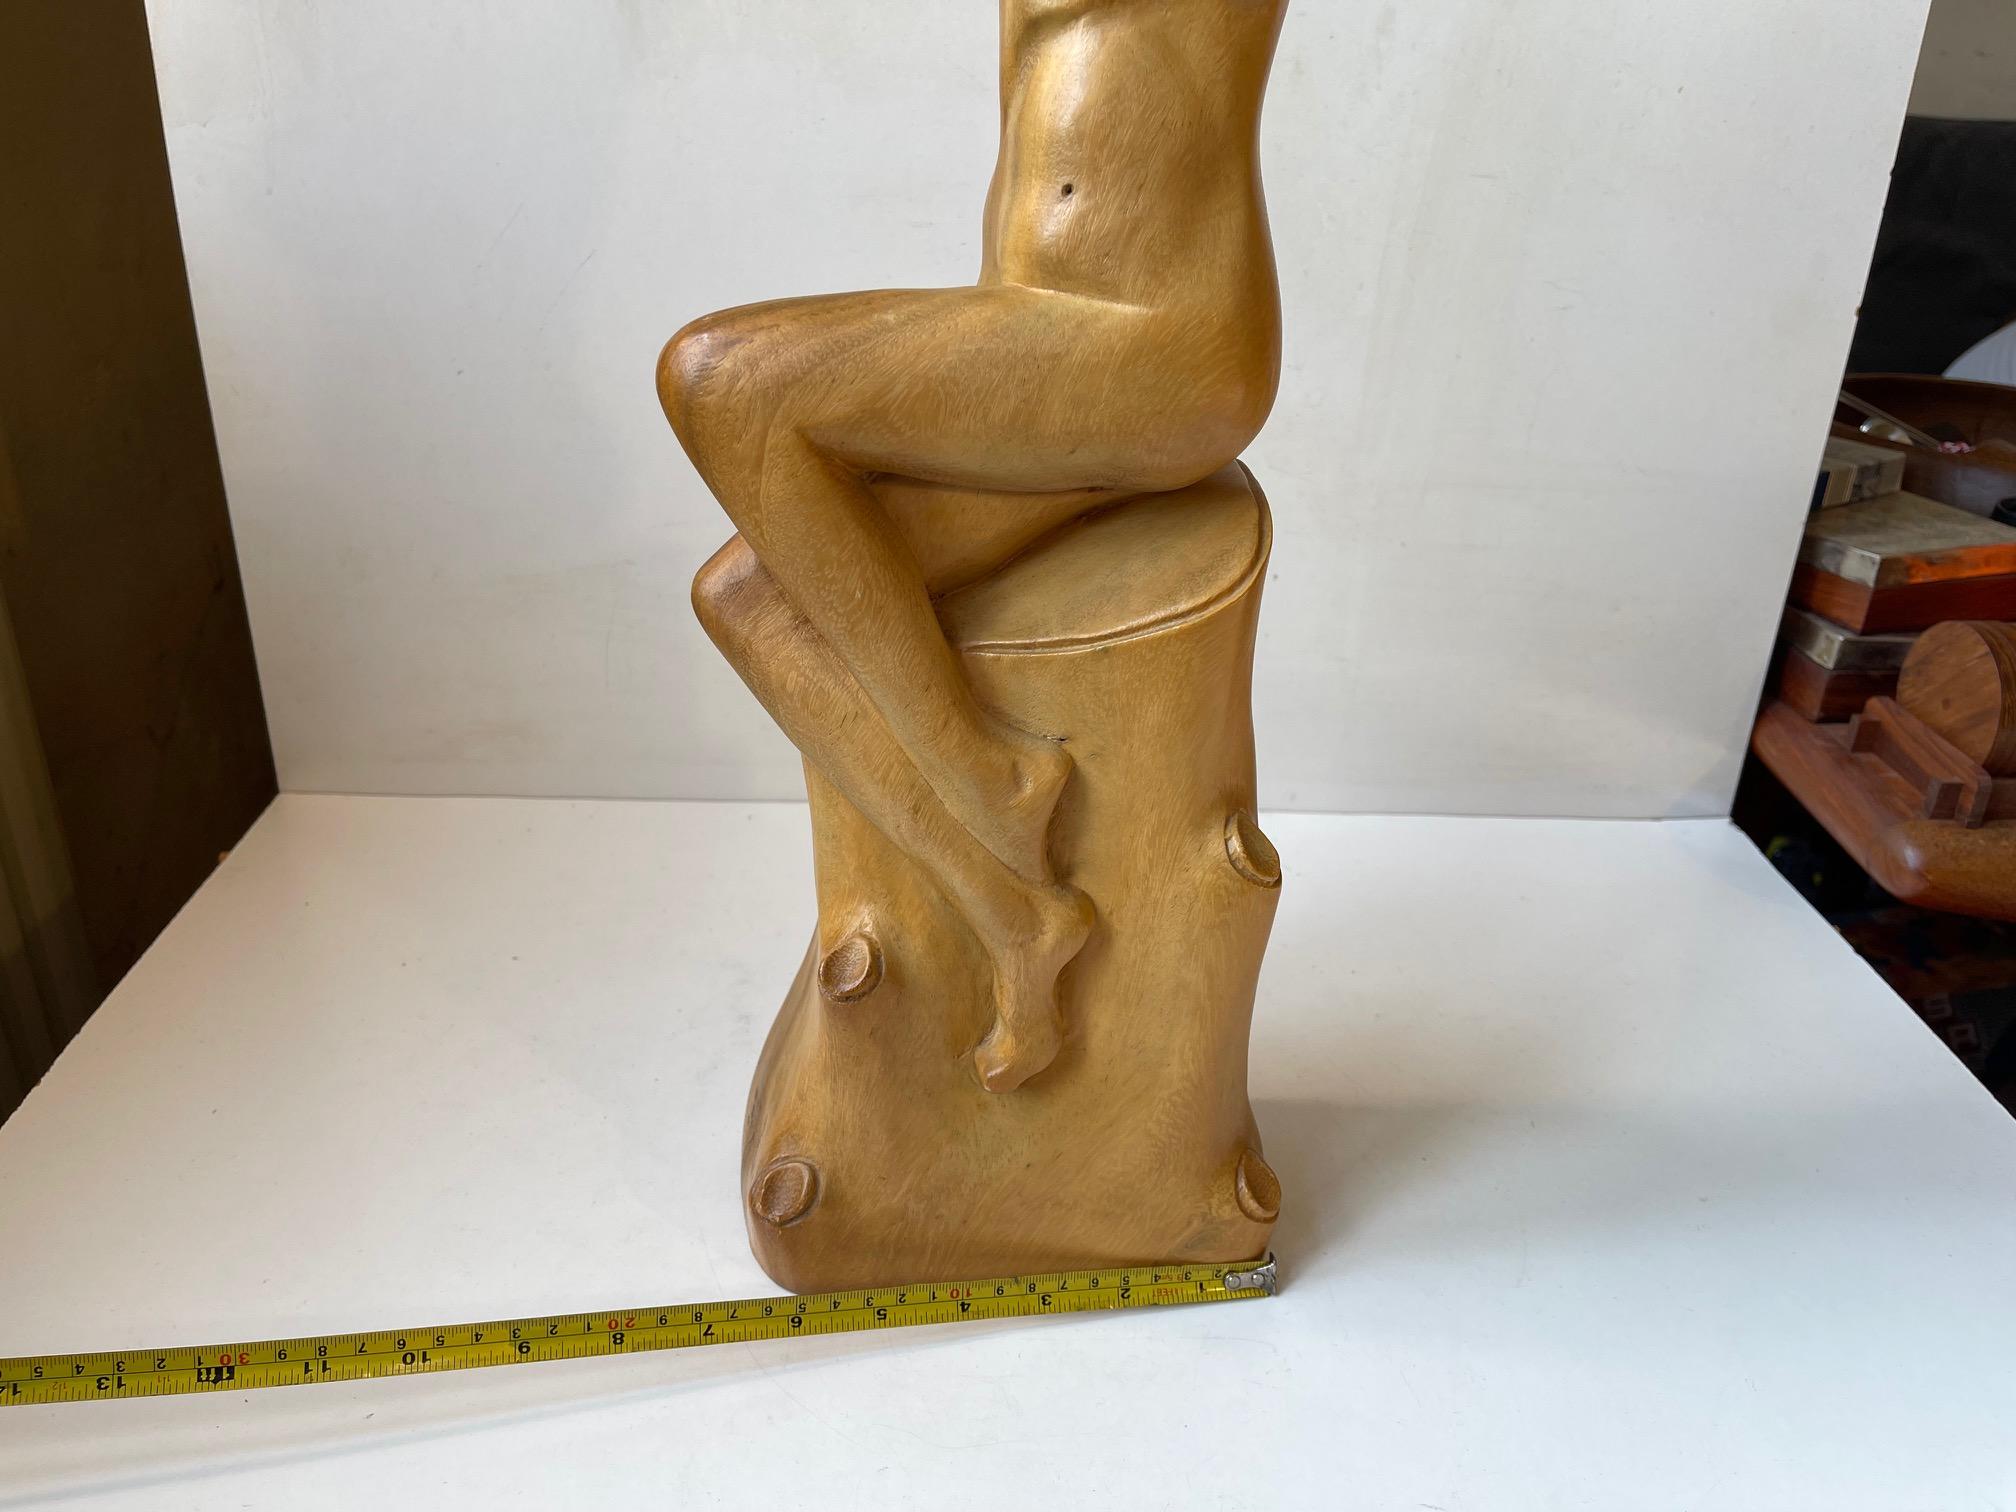 Art Deco Sculpture of Nude Female in Hand-Carved Wood, 1940s Scandinavia For Sale 1